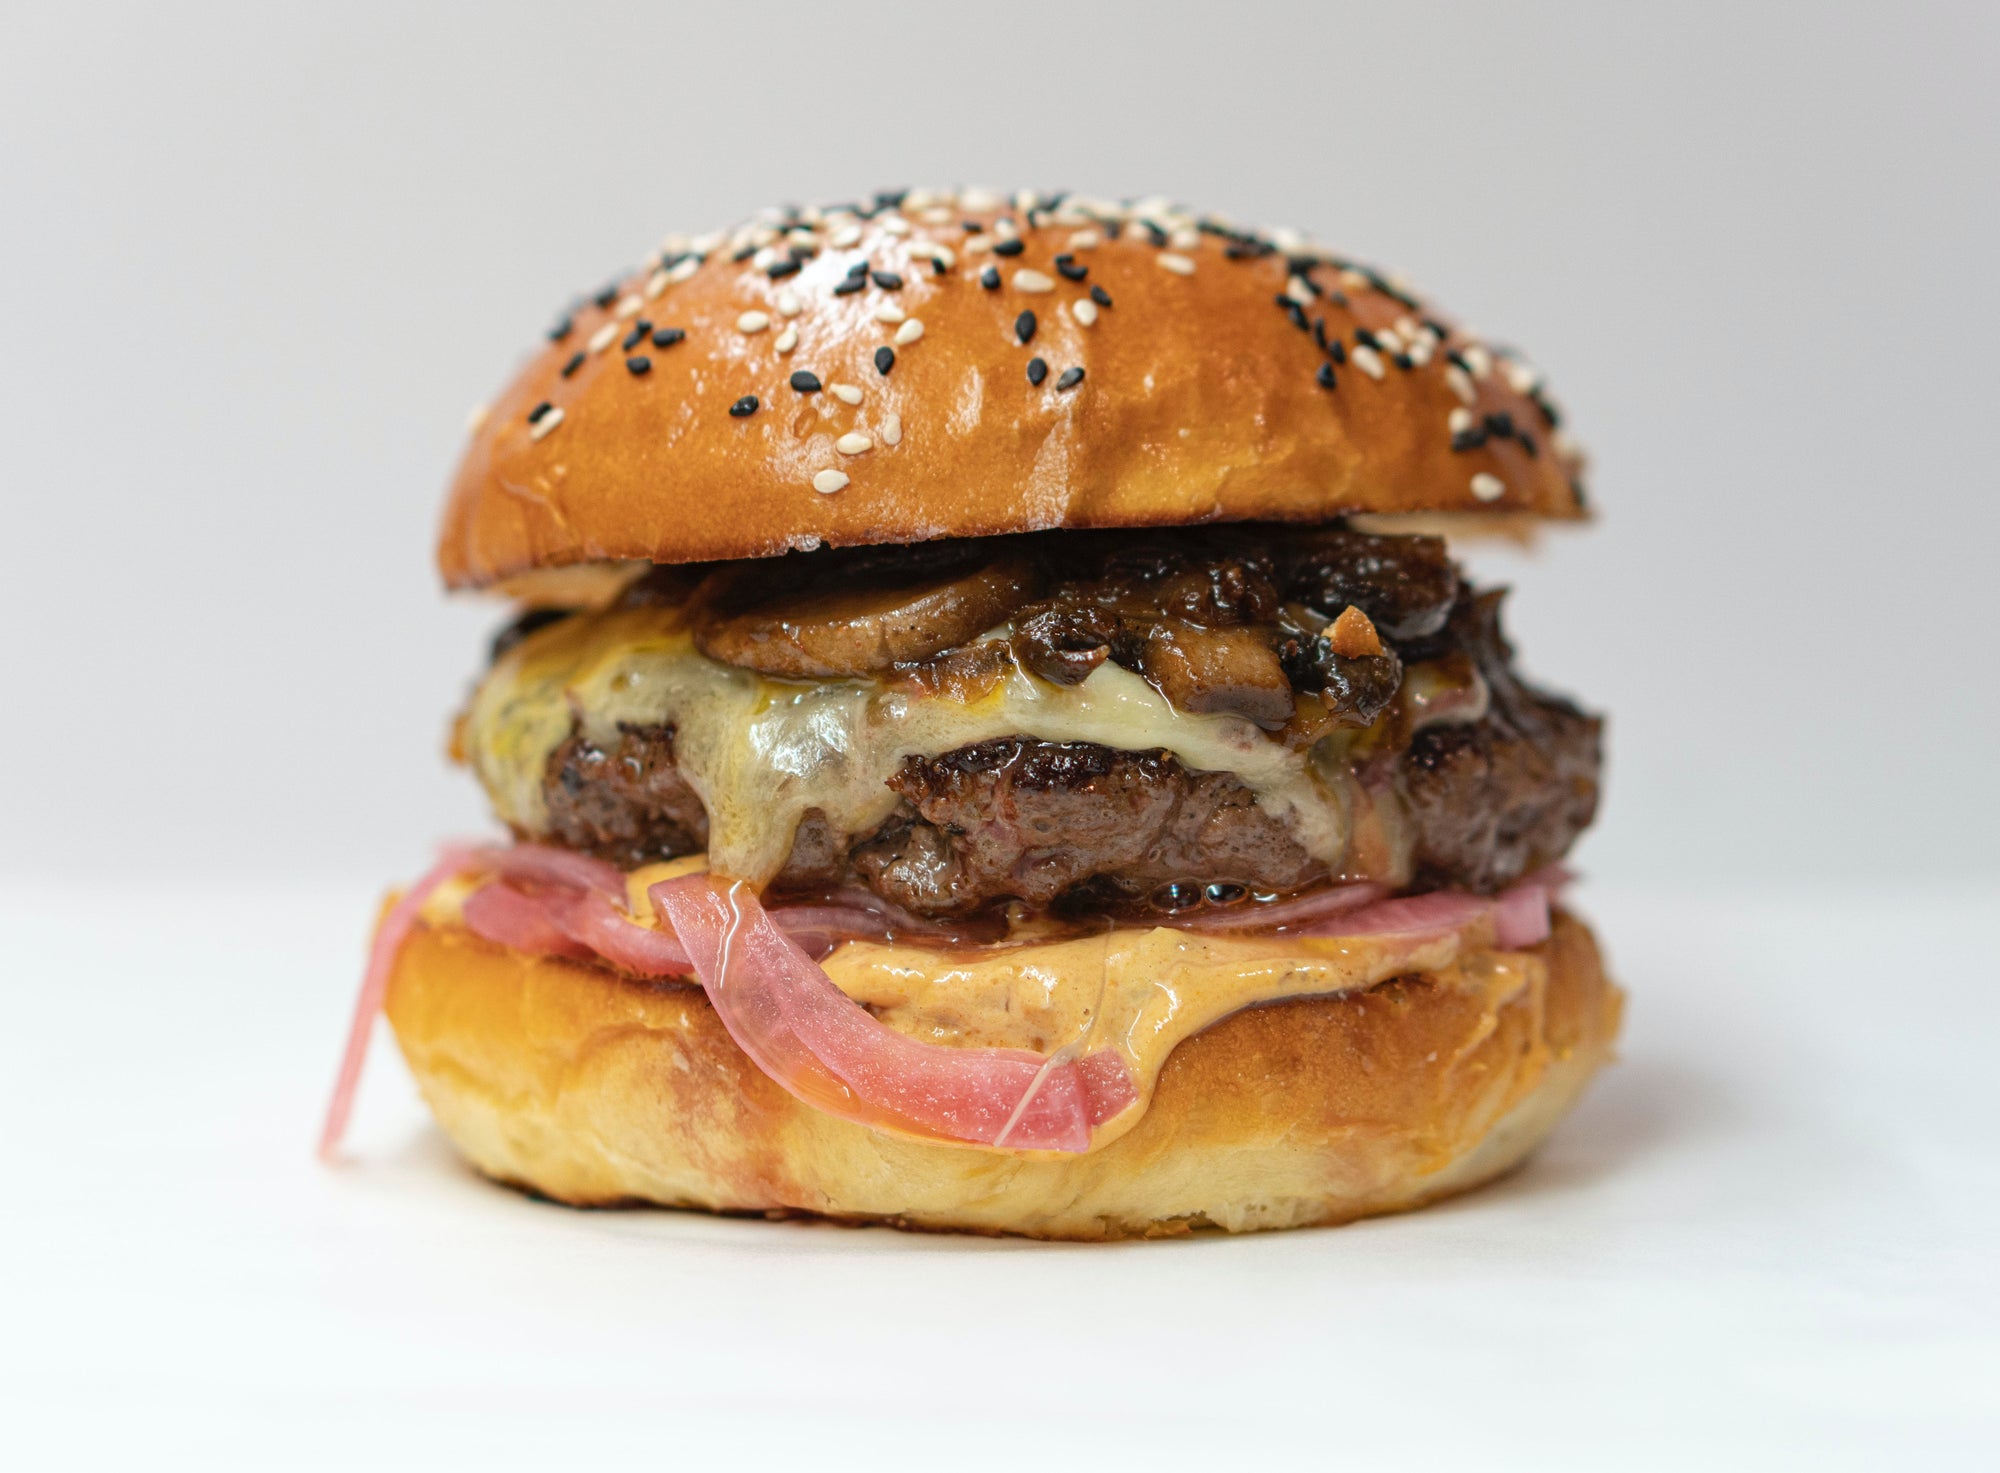 Indulge in the Heavenly Japanese Wagyu Burger with Creamy Uni Sauce - A Gourmet Delight